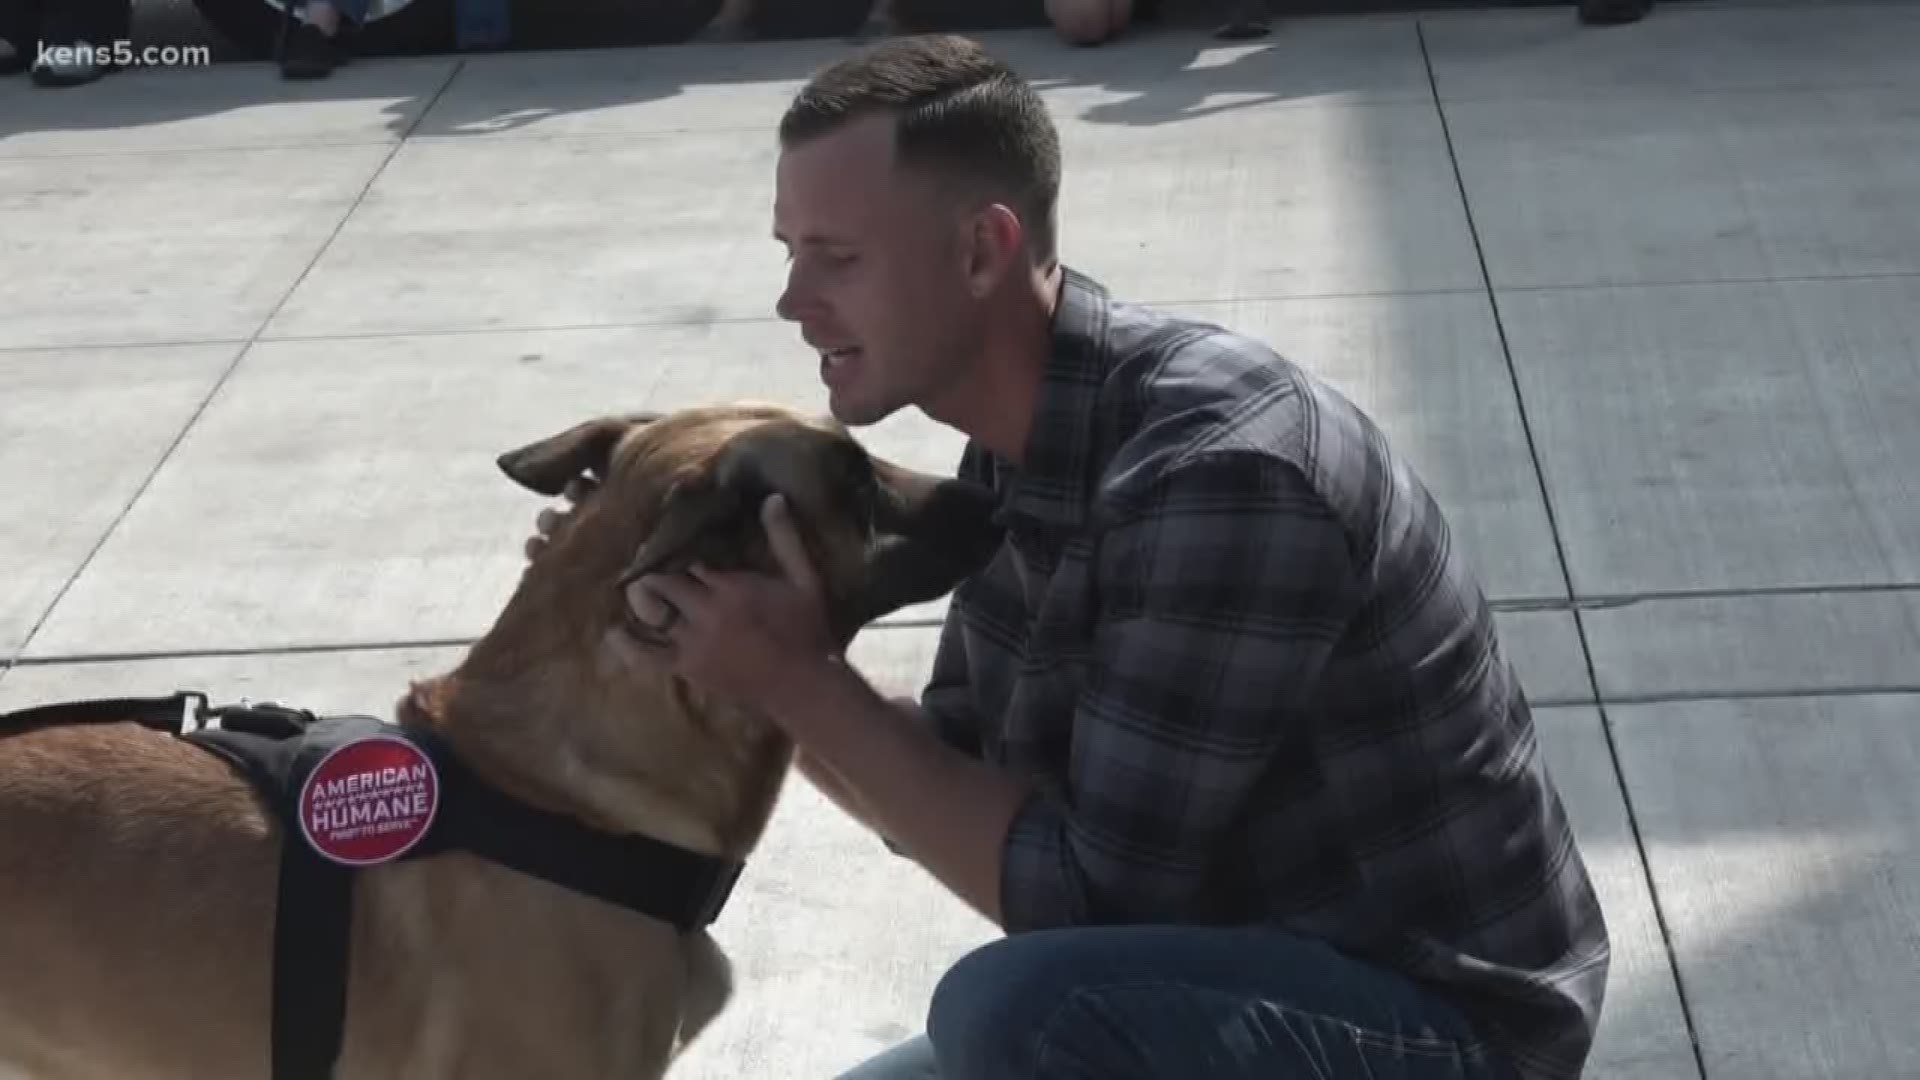 A military dog received the best gift for his retirement. He was reunited with his former partner, who is adopting him. Eyewitness news reporter Sharon Ko shows us the heartwarming reunion.